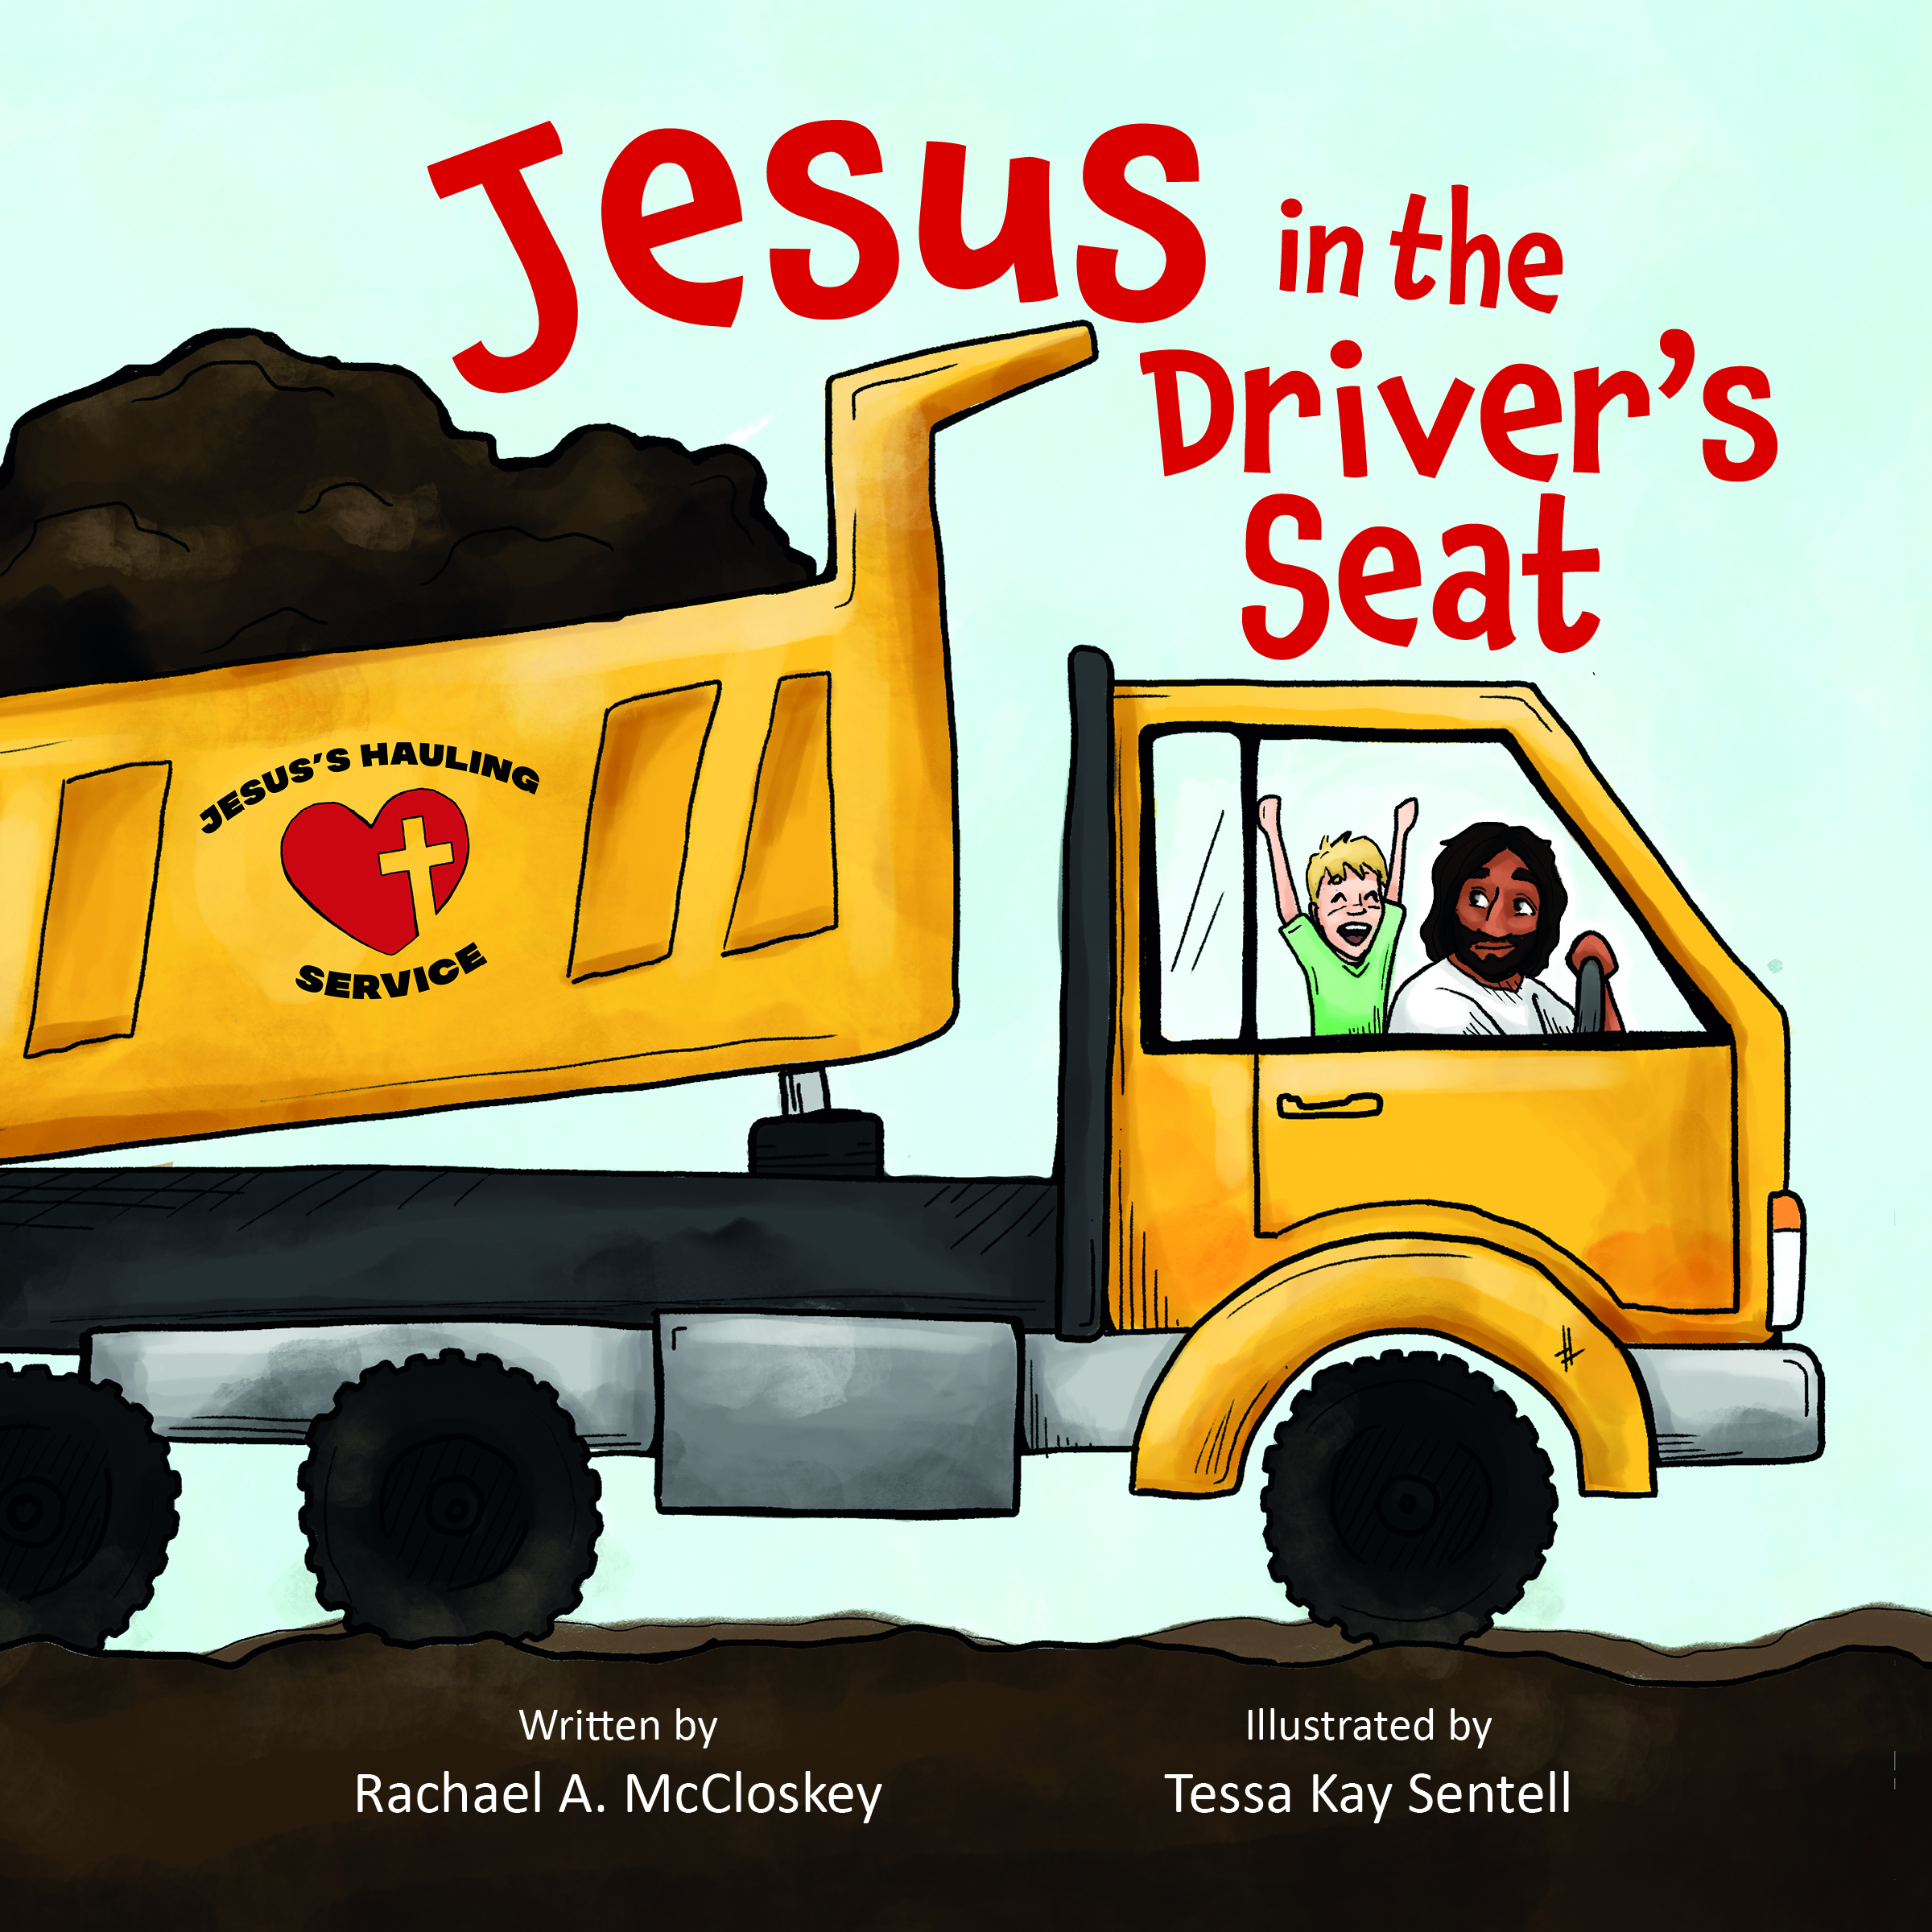 Jesus-in-the-driver's-seat-front-v1 (1)